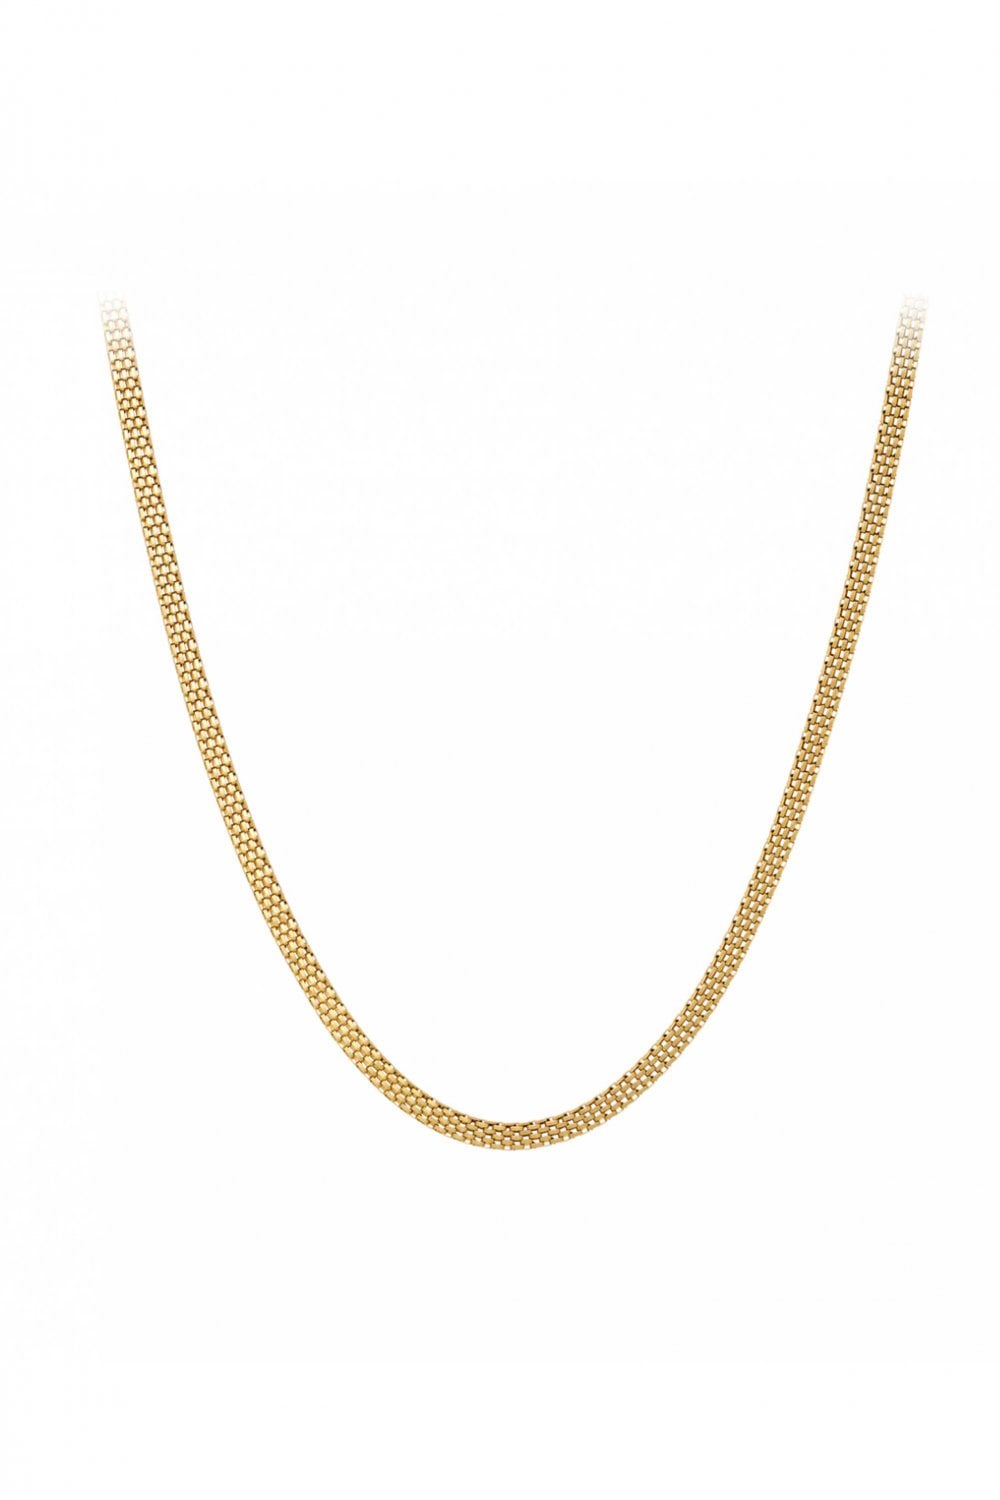 pernille-corydon-nora-necklace-in-gold